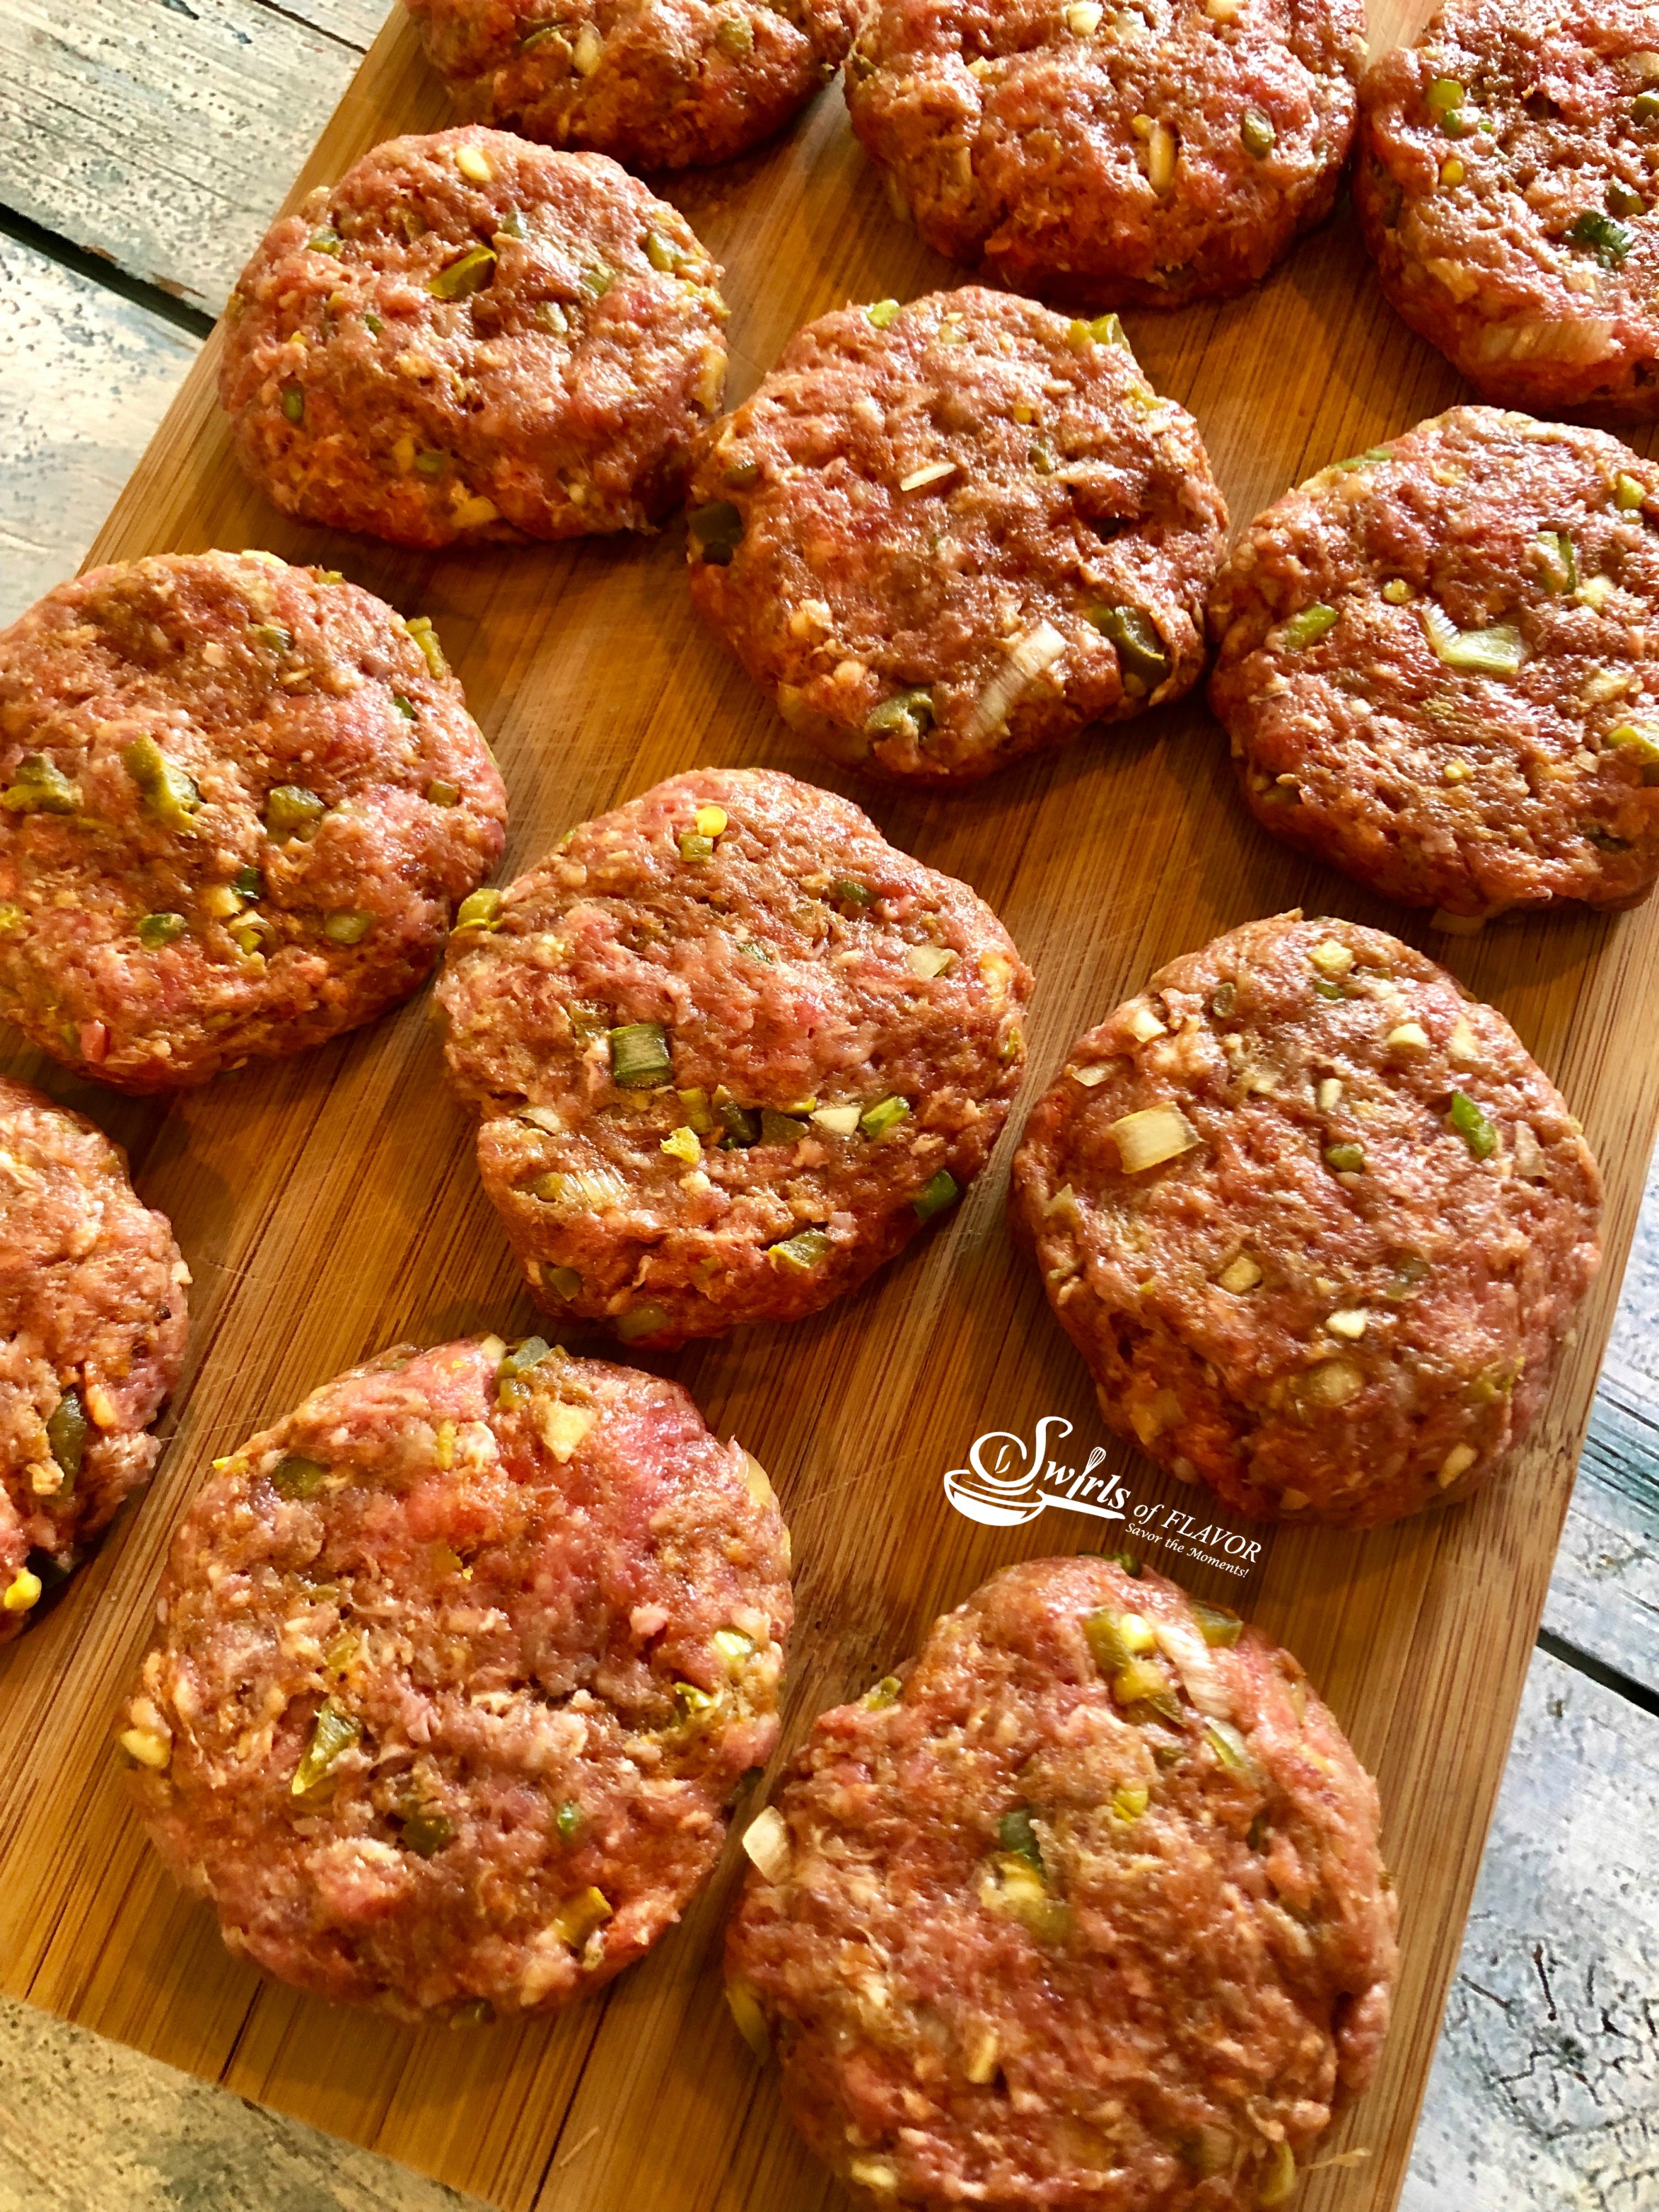 Jground beef mixture shaped into sliders for jalapeno burgers